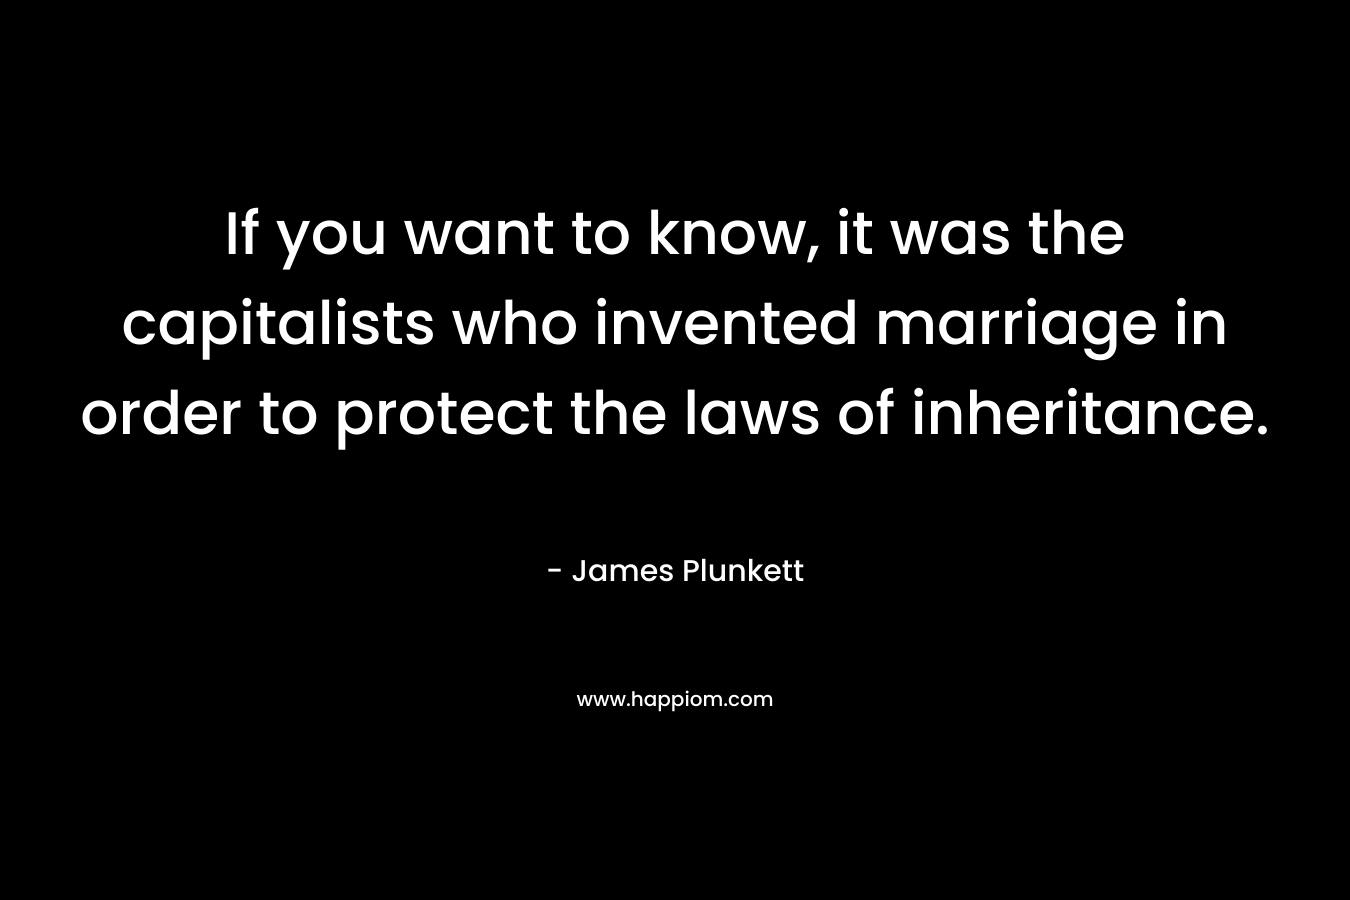 If you want to know, it was the capitalists who invented marriage in order to protect the laws of inheritance. – James Plunkett